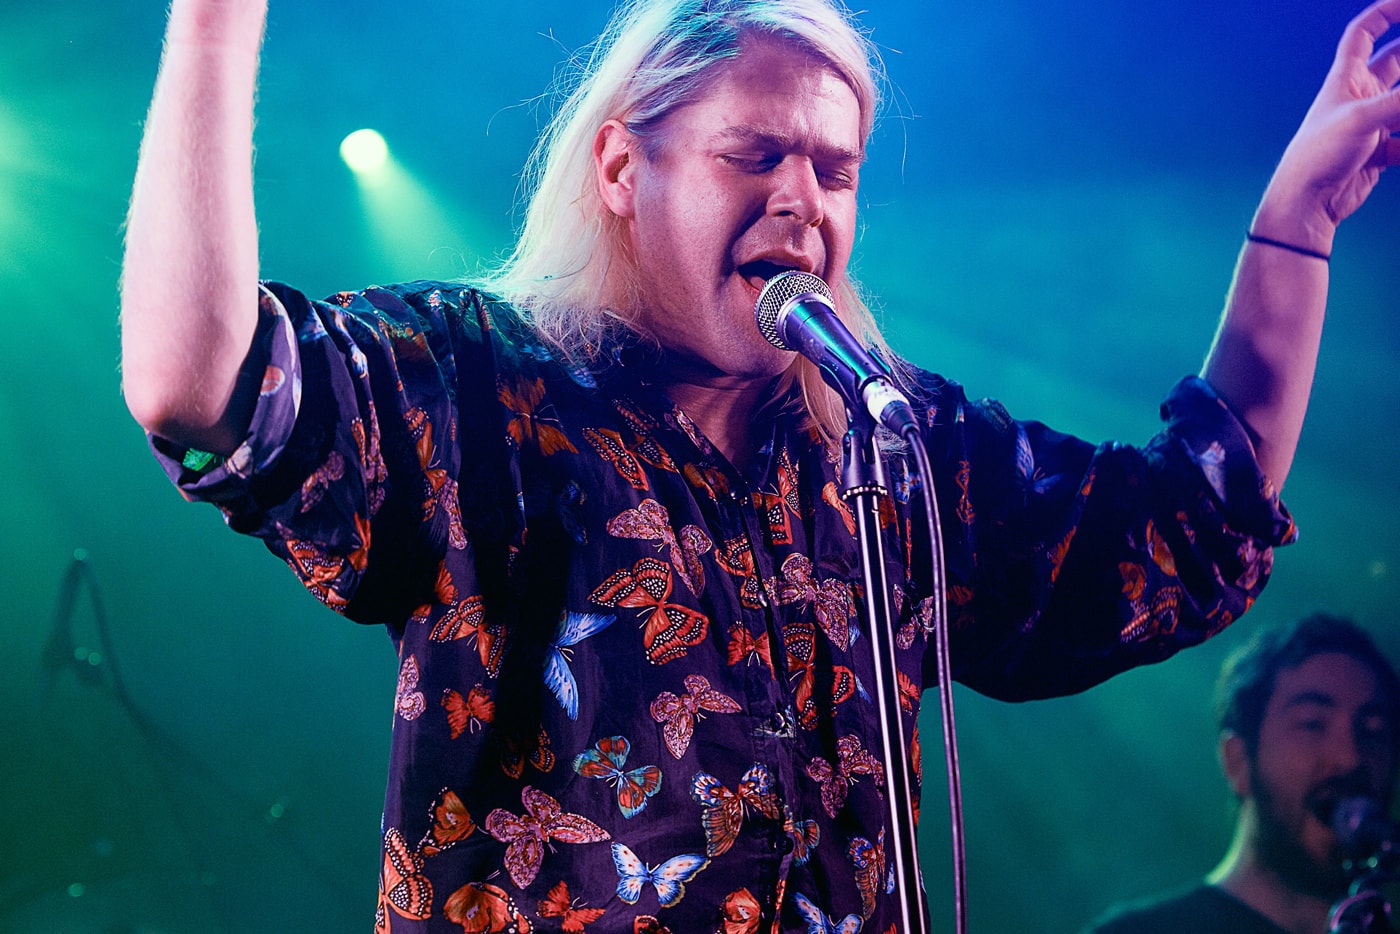 Ariel Pink With Added Pizzazz - In The Heat Of The Night